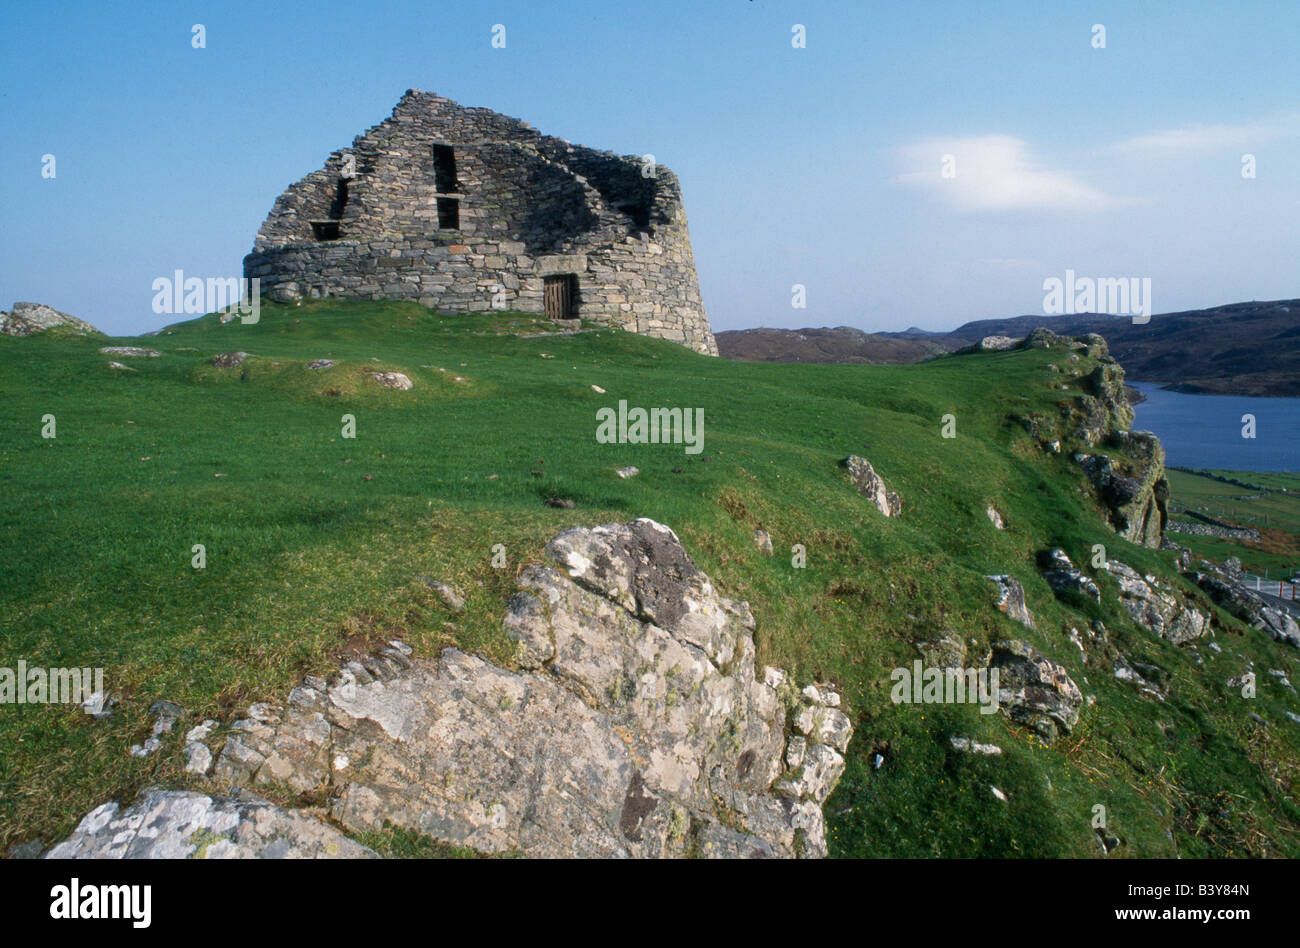 Scotland, Isle of Lewis - Outer Hebrides, Carloway Broch. Dun ...